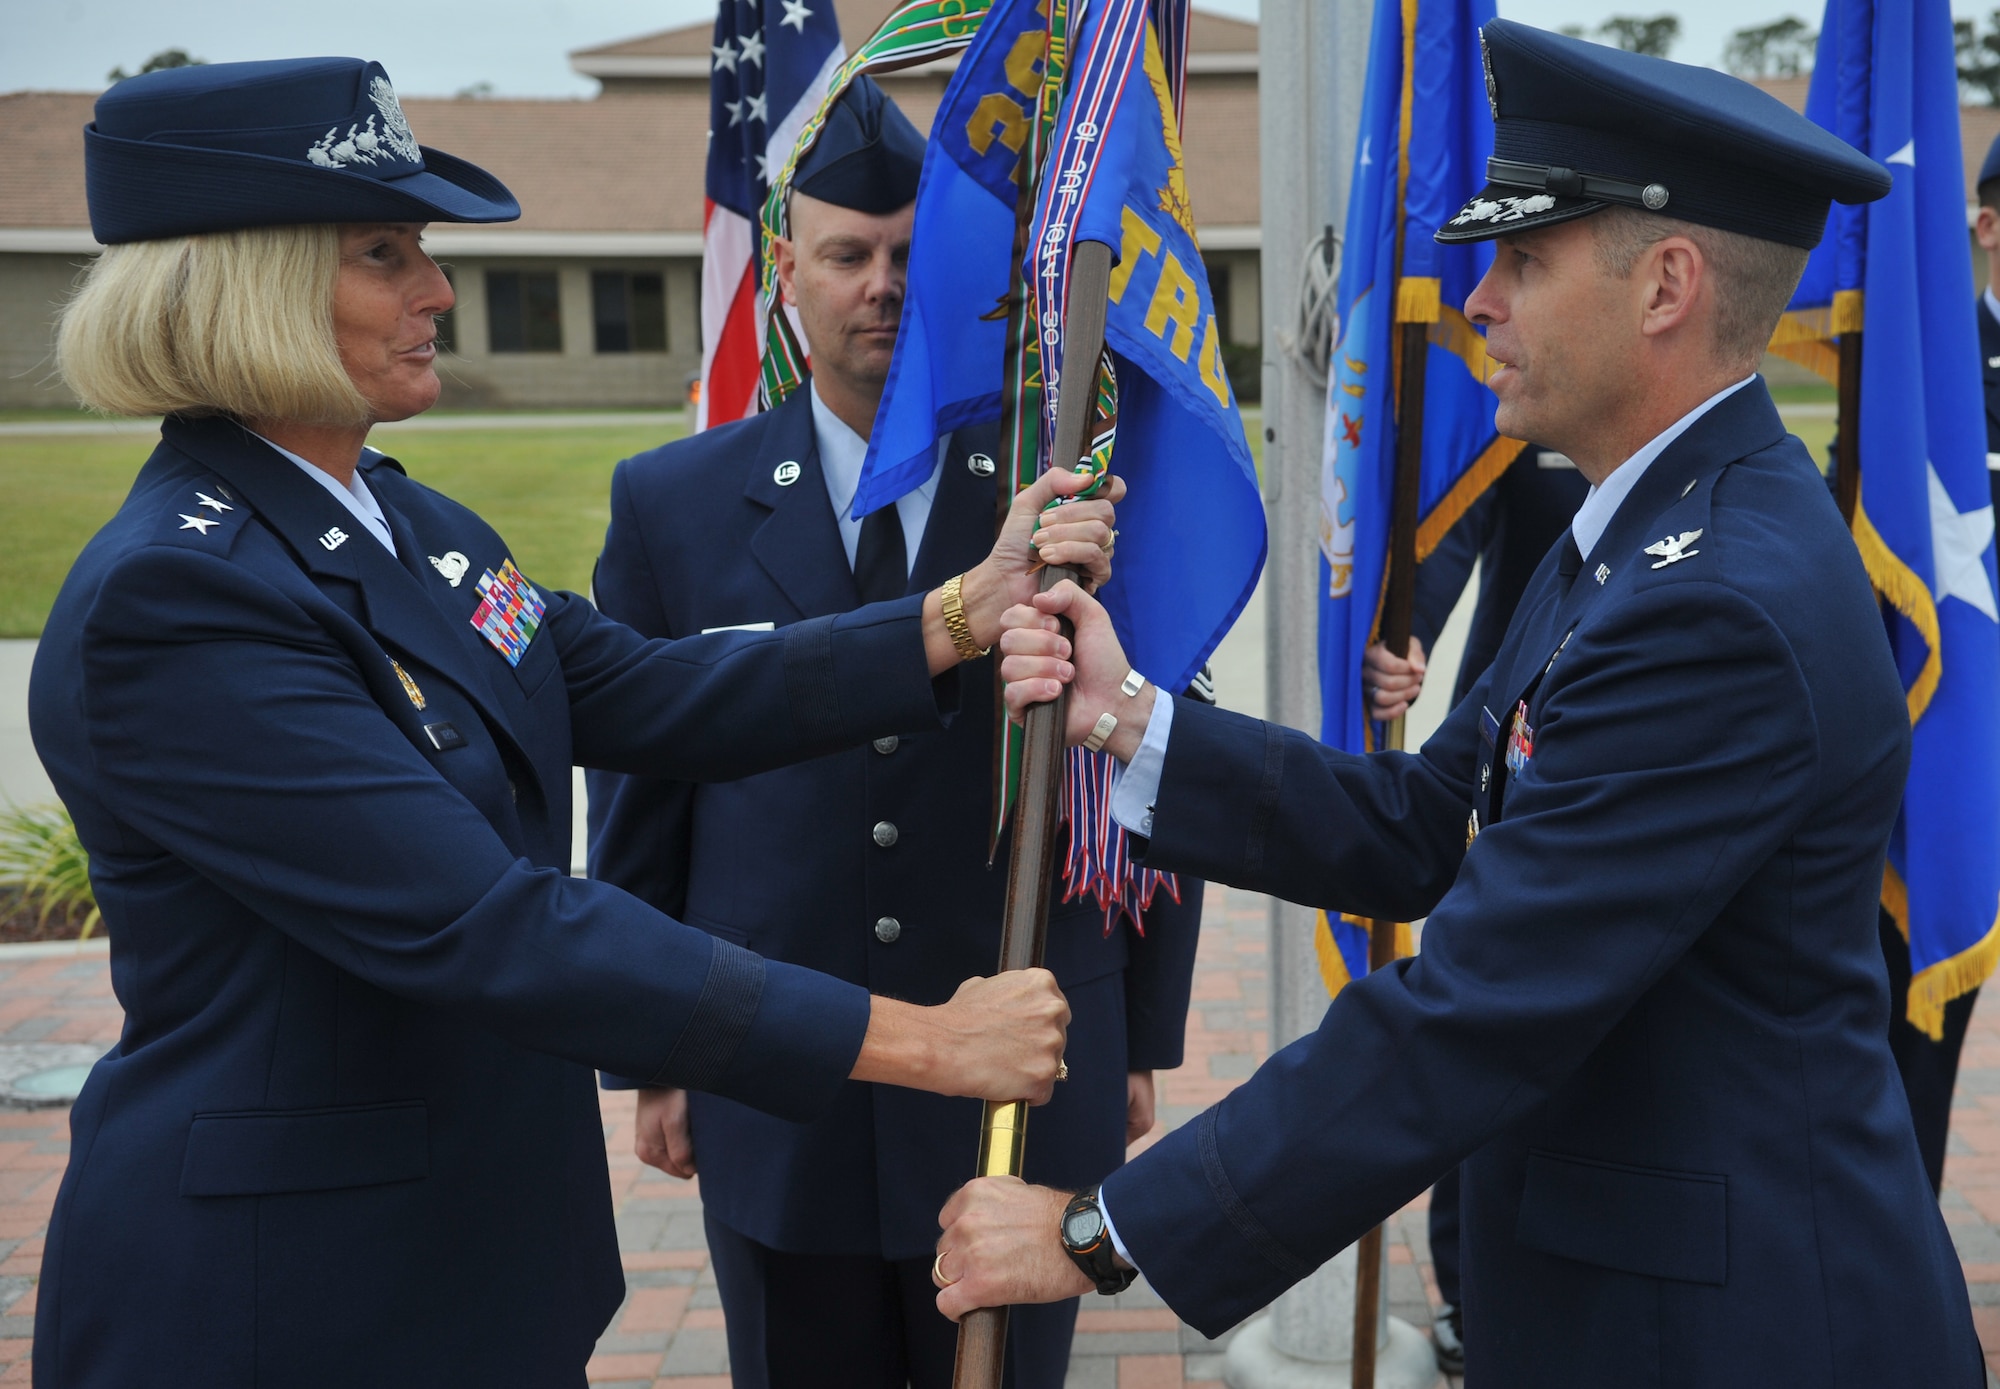 VANDENBERG AIR FORCE BASE, Calif. -- Col. Michael Lutton, the incoming 381st Training Group commander, assumes command as he accepts the guidon flag from Maj. Gen. Mary Kay Hertog, the 2nd Air Force commander, during the change of command ceremony here Wednesday, July 7, 2010.  (U.S. Air Force photo/Senior Airman Andrew Lee)